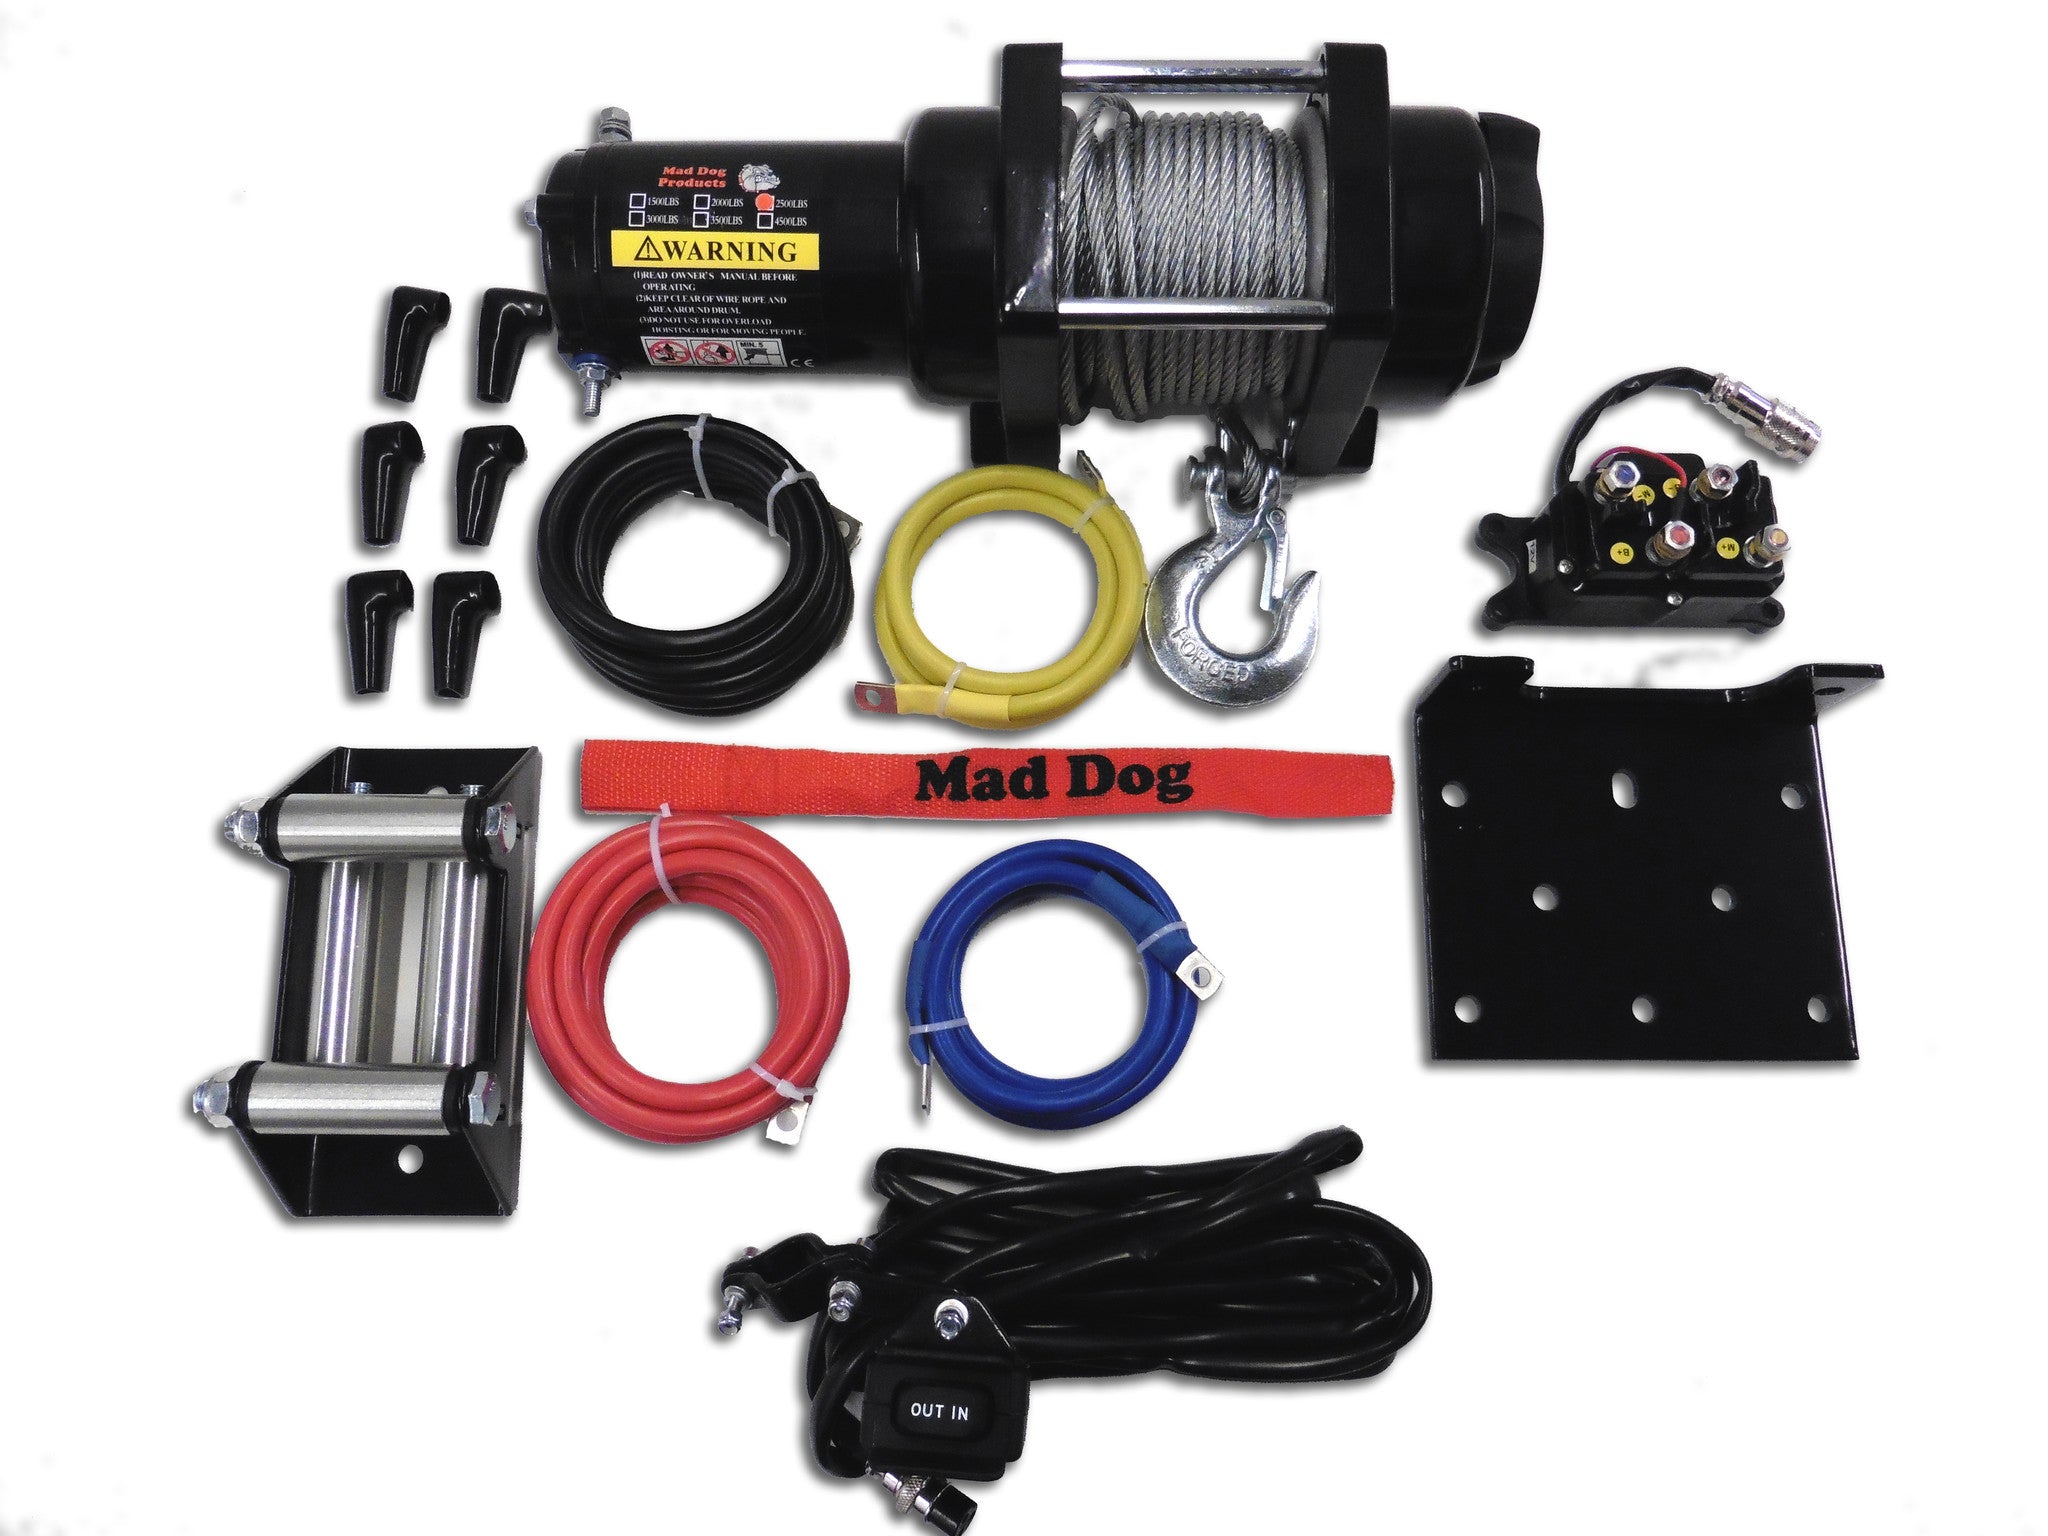 Cables & Ropes - Plows & Winches - Accessories - ATV/UTV